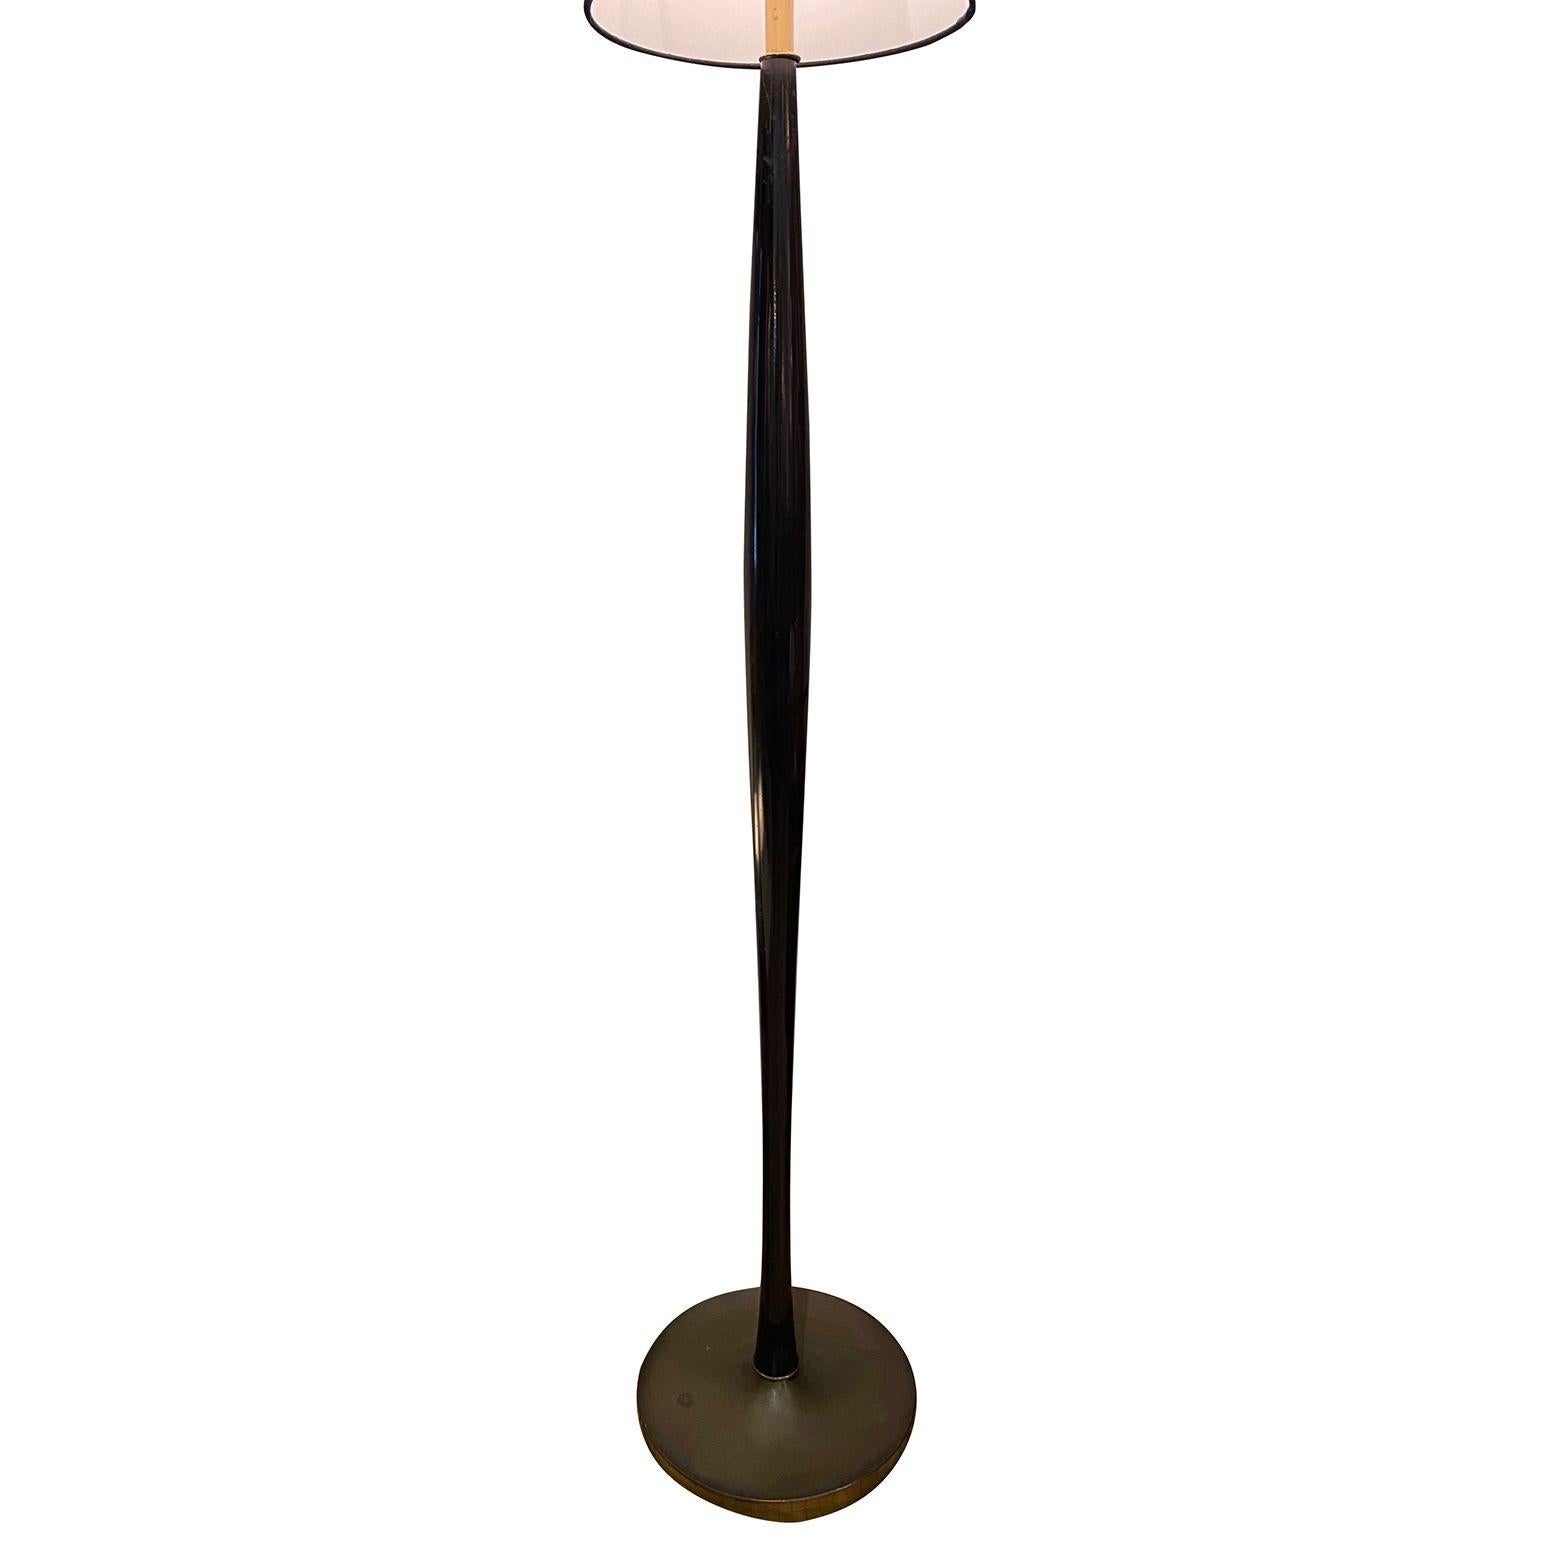 1950's Italian, Brass and Black Ebonised Wood Floor Lamp, Attributed to Stilnovo For Sale 2